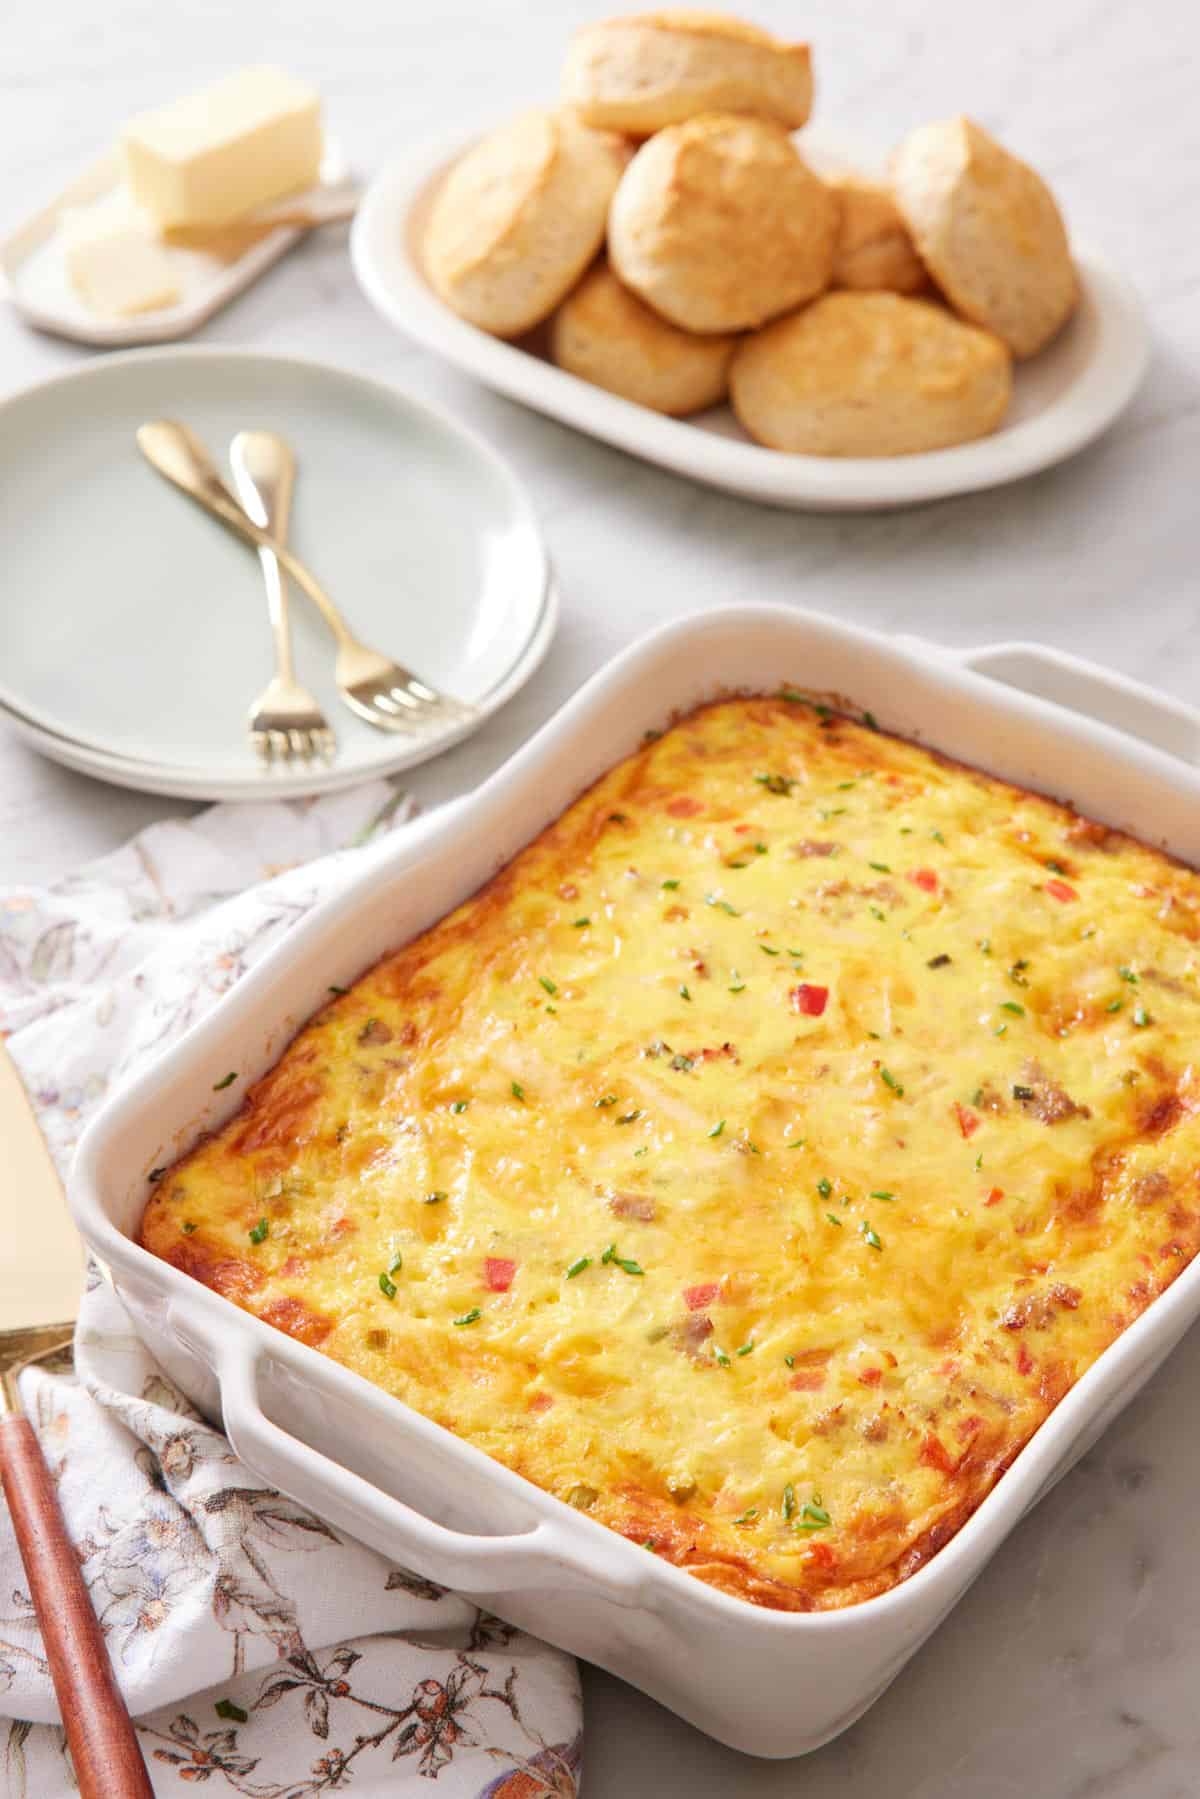 A baking dish of breakfast casserole with a plate of rolls and stack of plates with forks in the background.